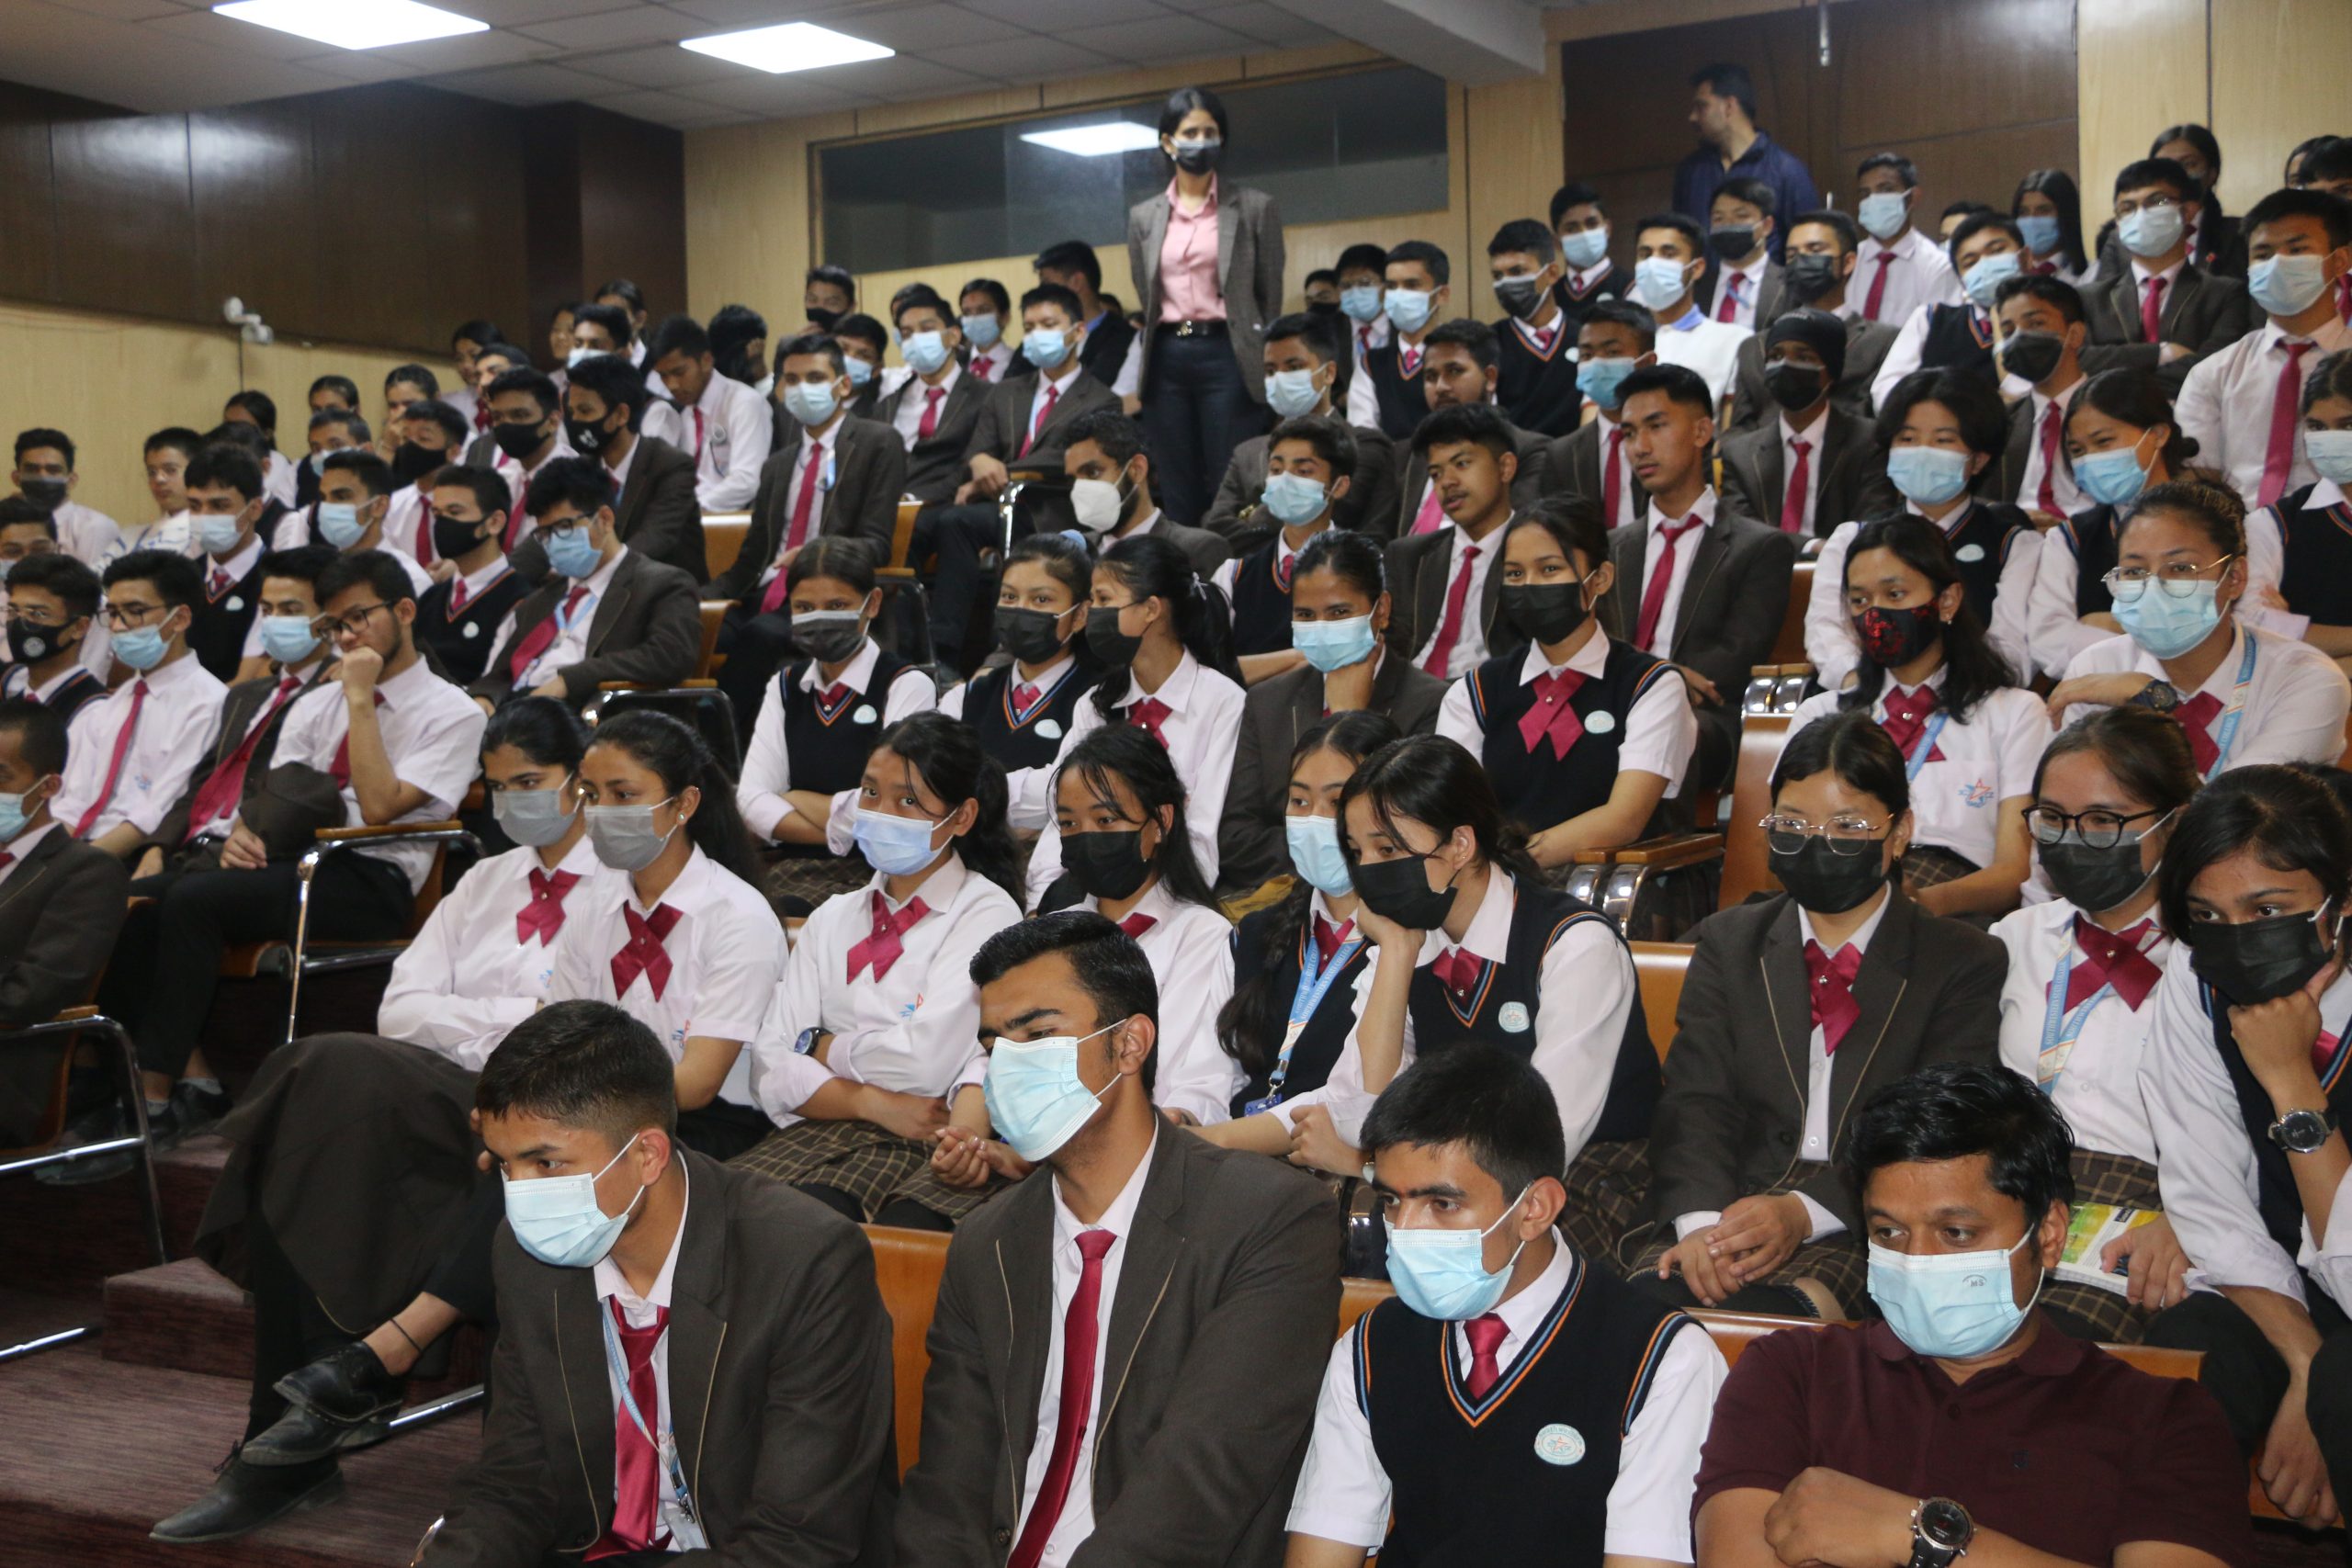 Seminar on “Demystifying the Brain and Brain Diseases”